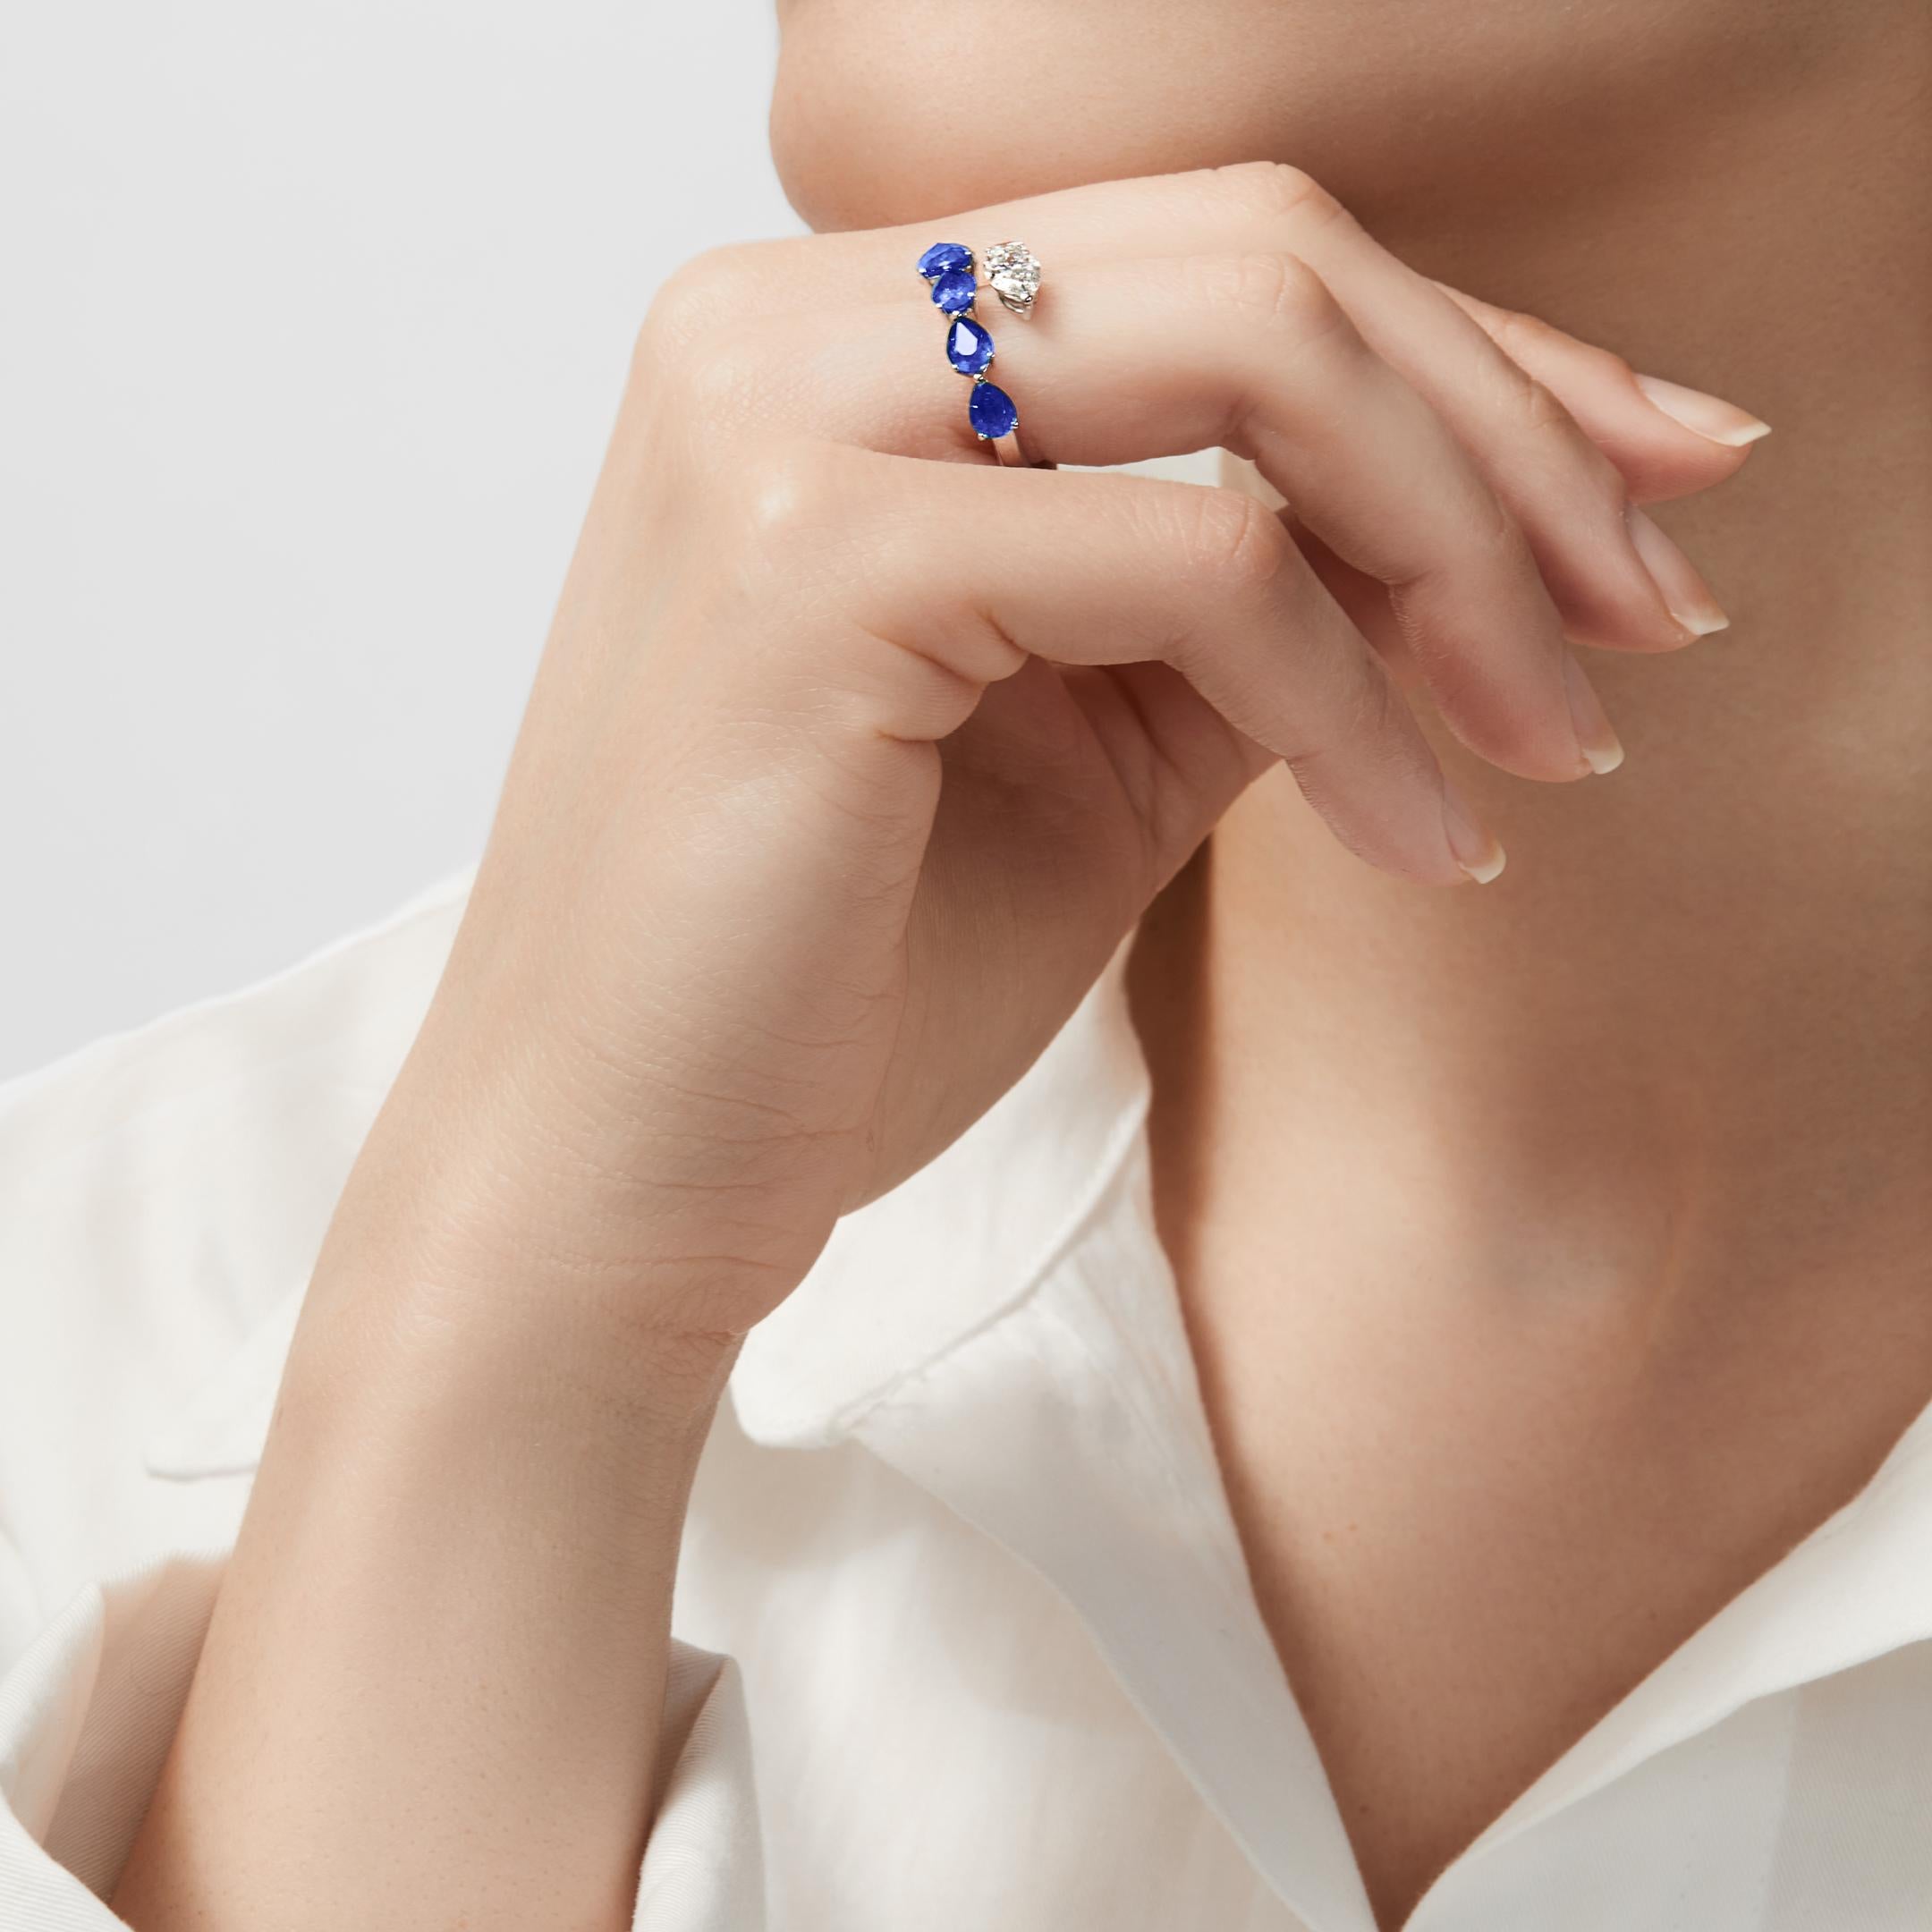 Your perfect accessory awaits in the Diamond and Sapphire Bypass Ring. This chic statement piece embraces the finger with a line of pear-shaped diamonds that faces a row of pear-shaped sapphires. The ring’s open design is fashion-forward, yet–like